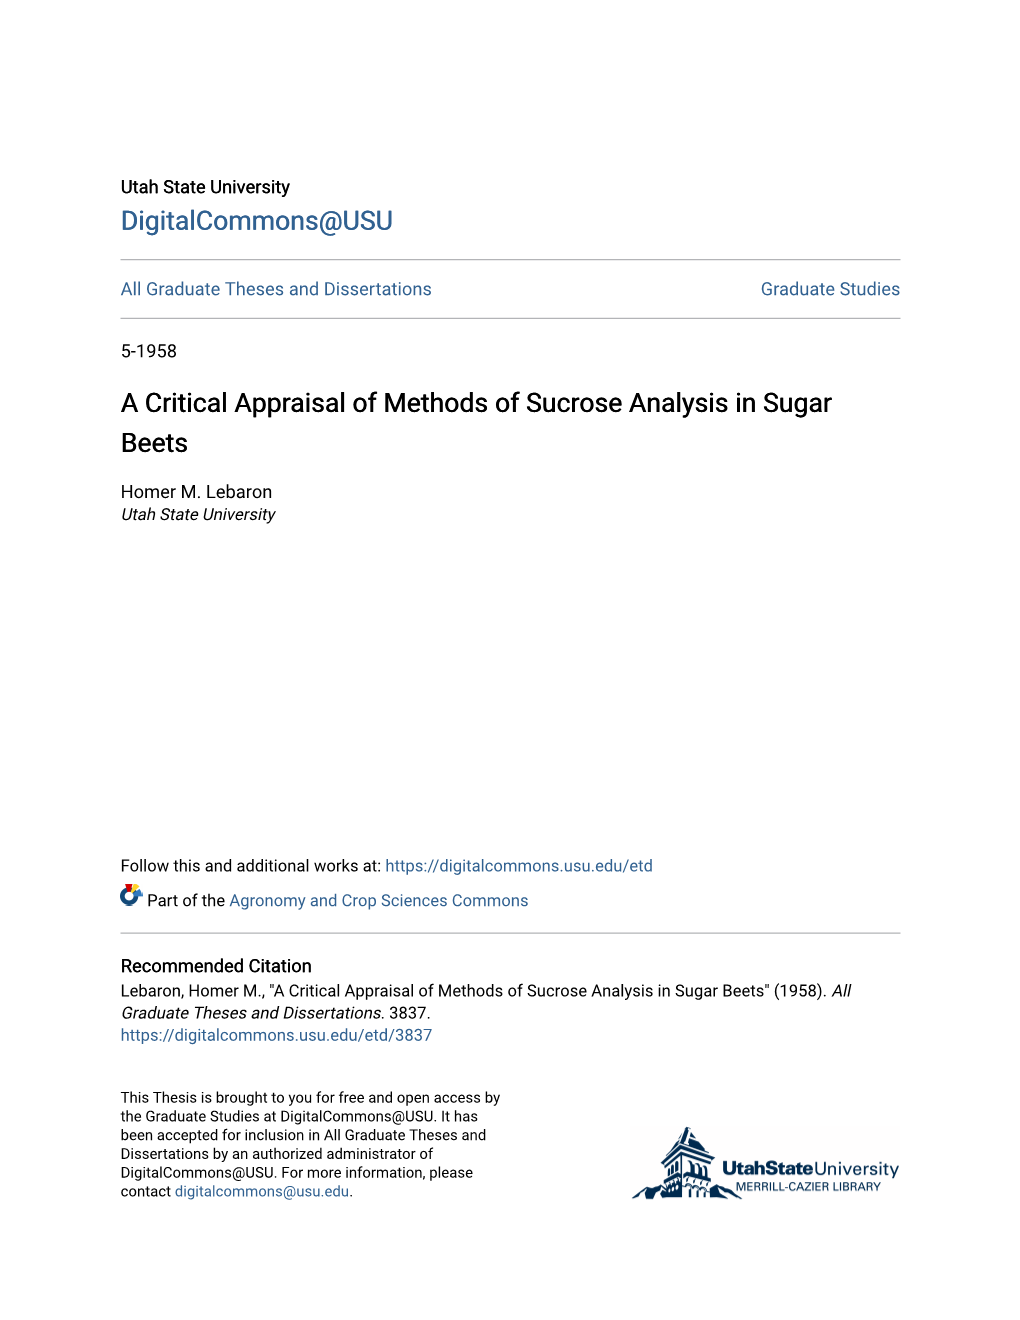 A Critical Appraisal of Methods of Sucrose Analysis in Sugar Beets